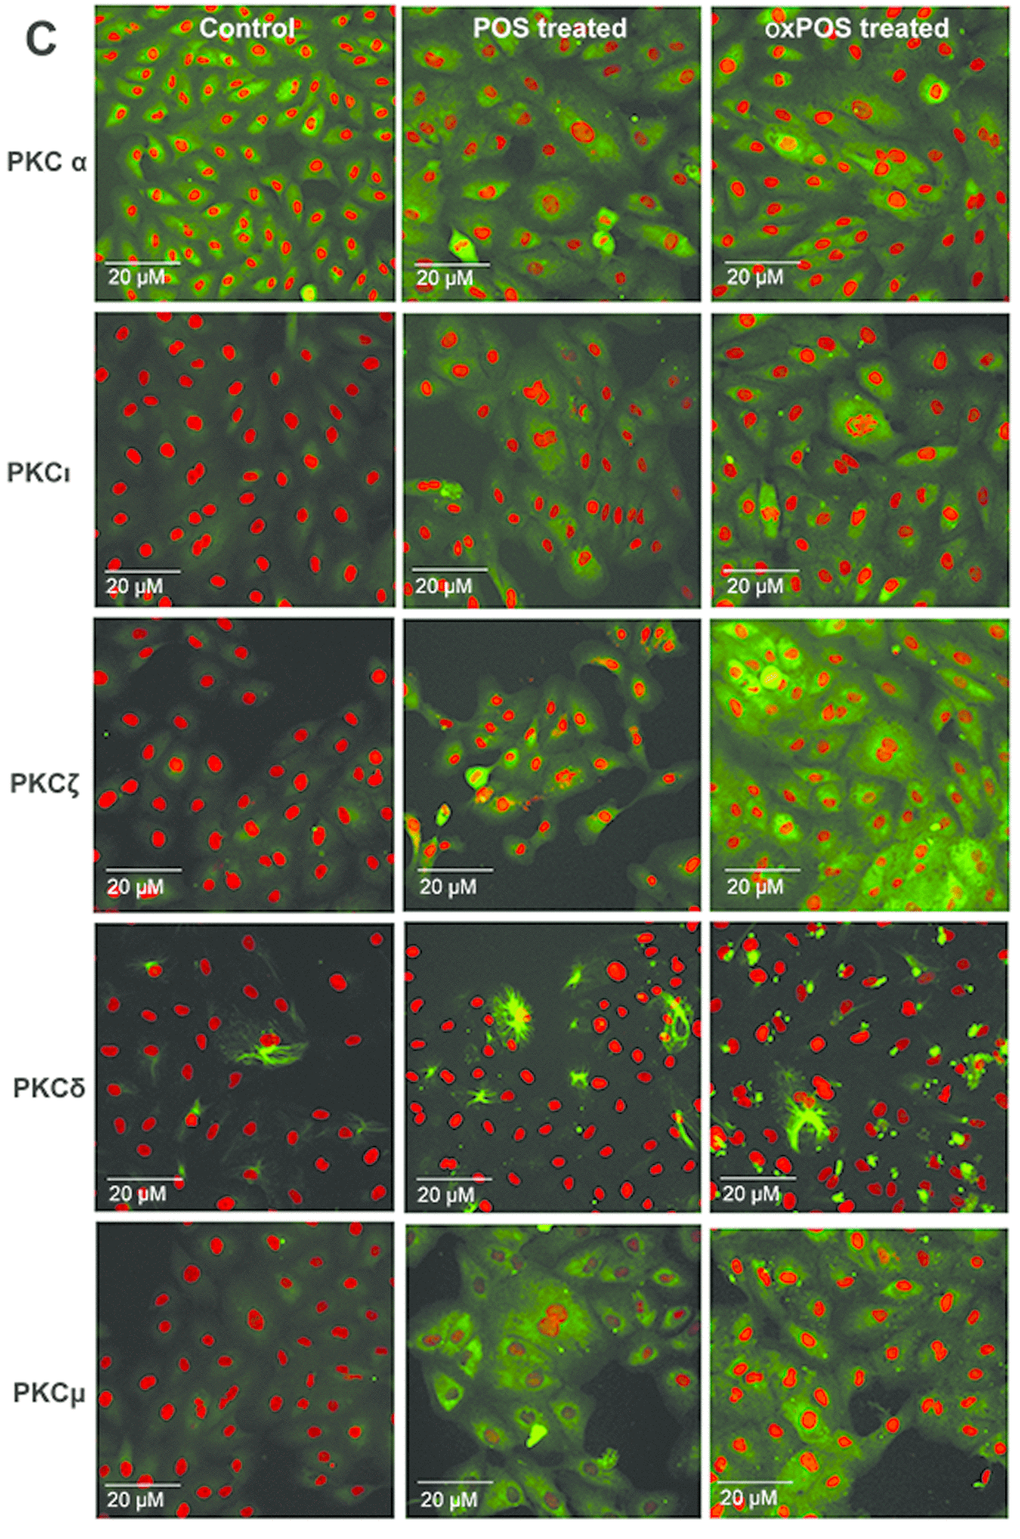 Expression of PKC isoforms in ARPE19 cells.(C) Immunofluorescent staining of PKCα, PKCδ, PKCζ, PKCι and PKCμ isoforms in RPE cells following POS or oxPOS treatments. The isoforms were in green, nuclei were labelled by PI in red.